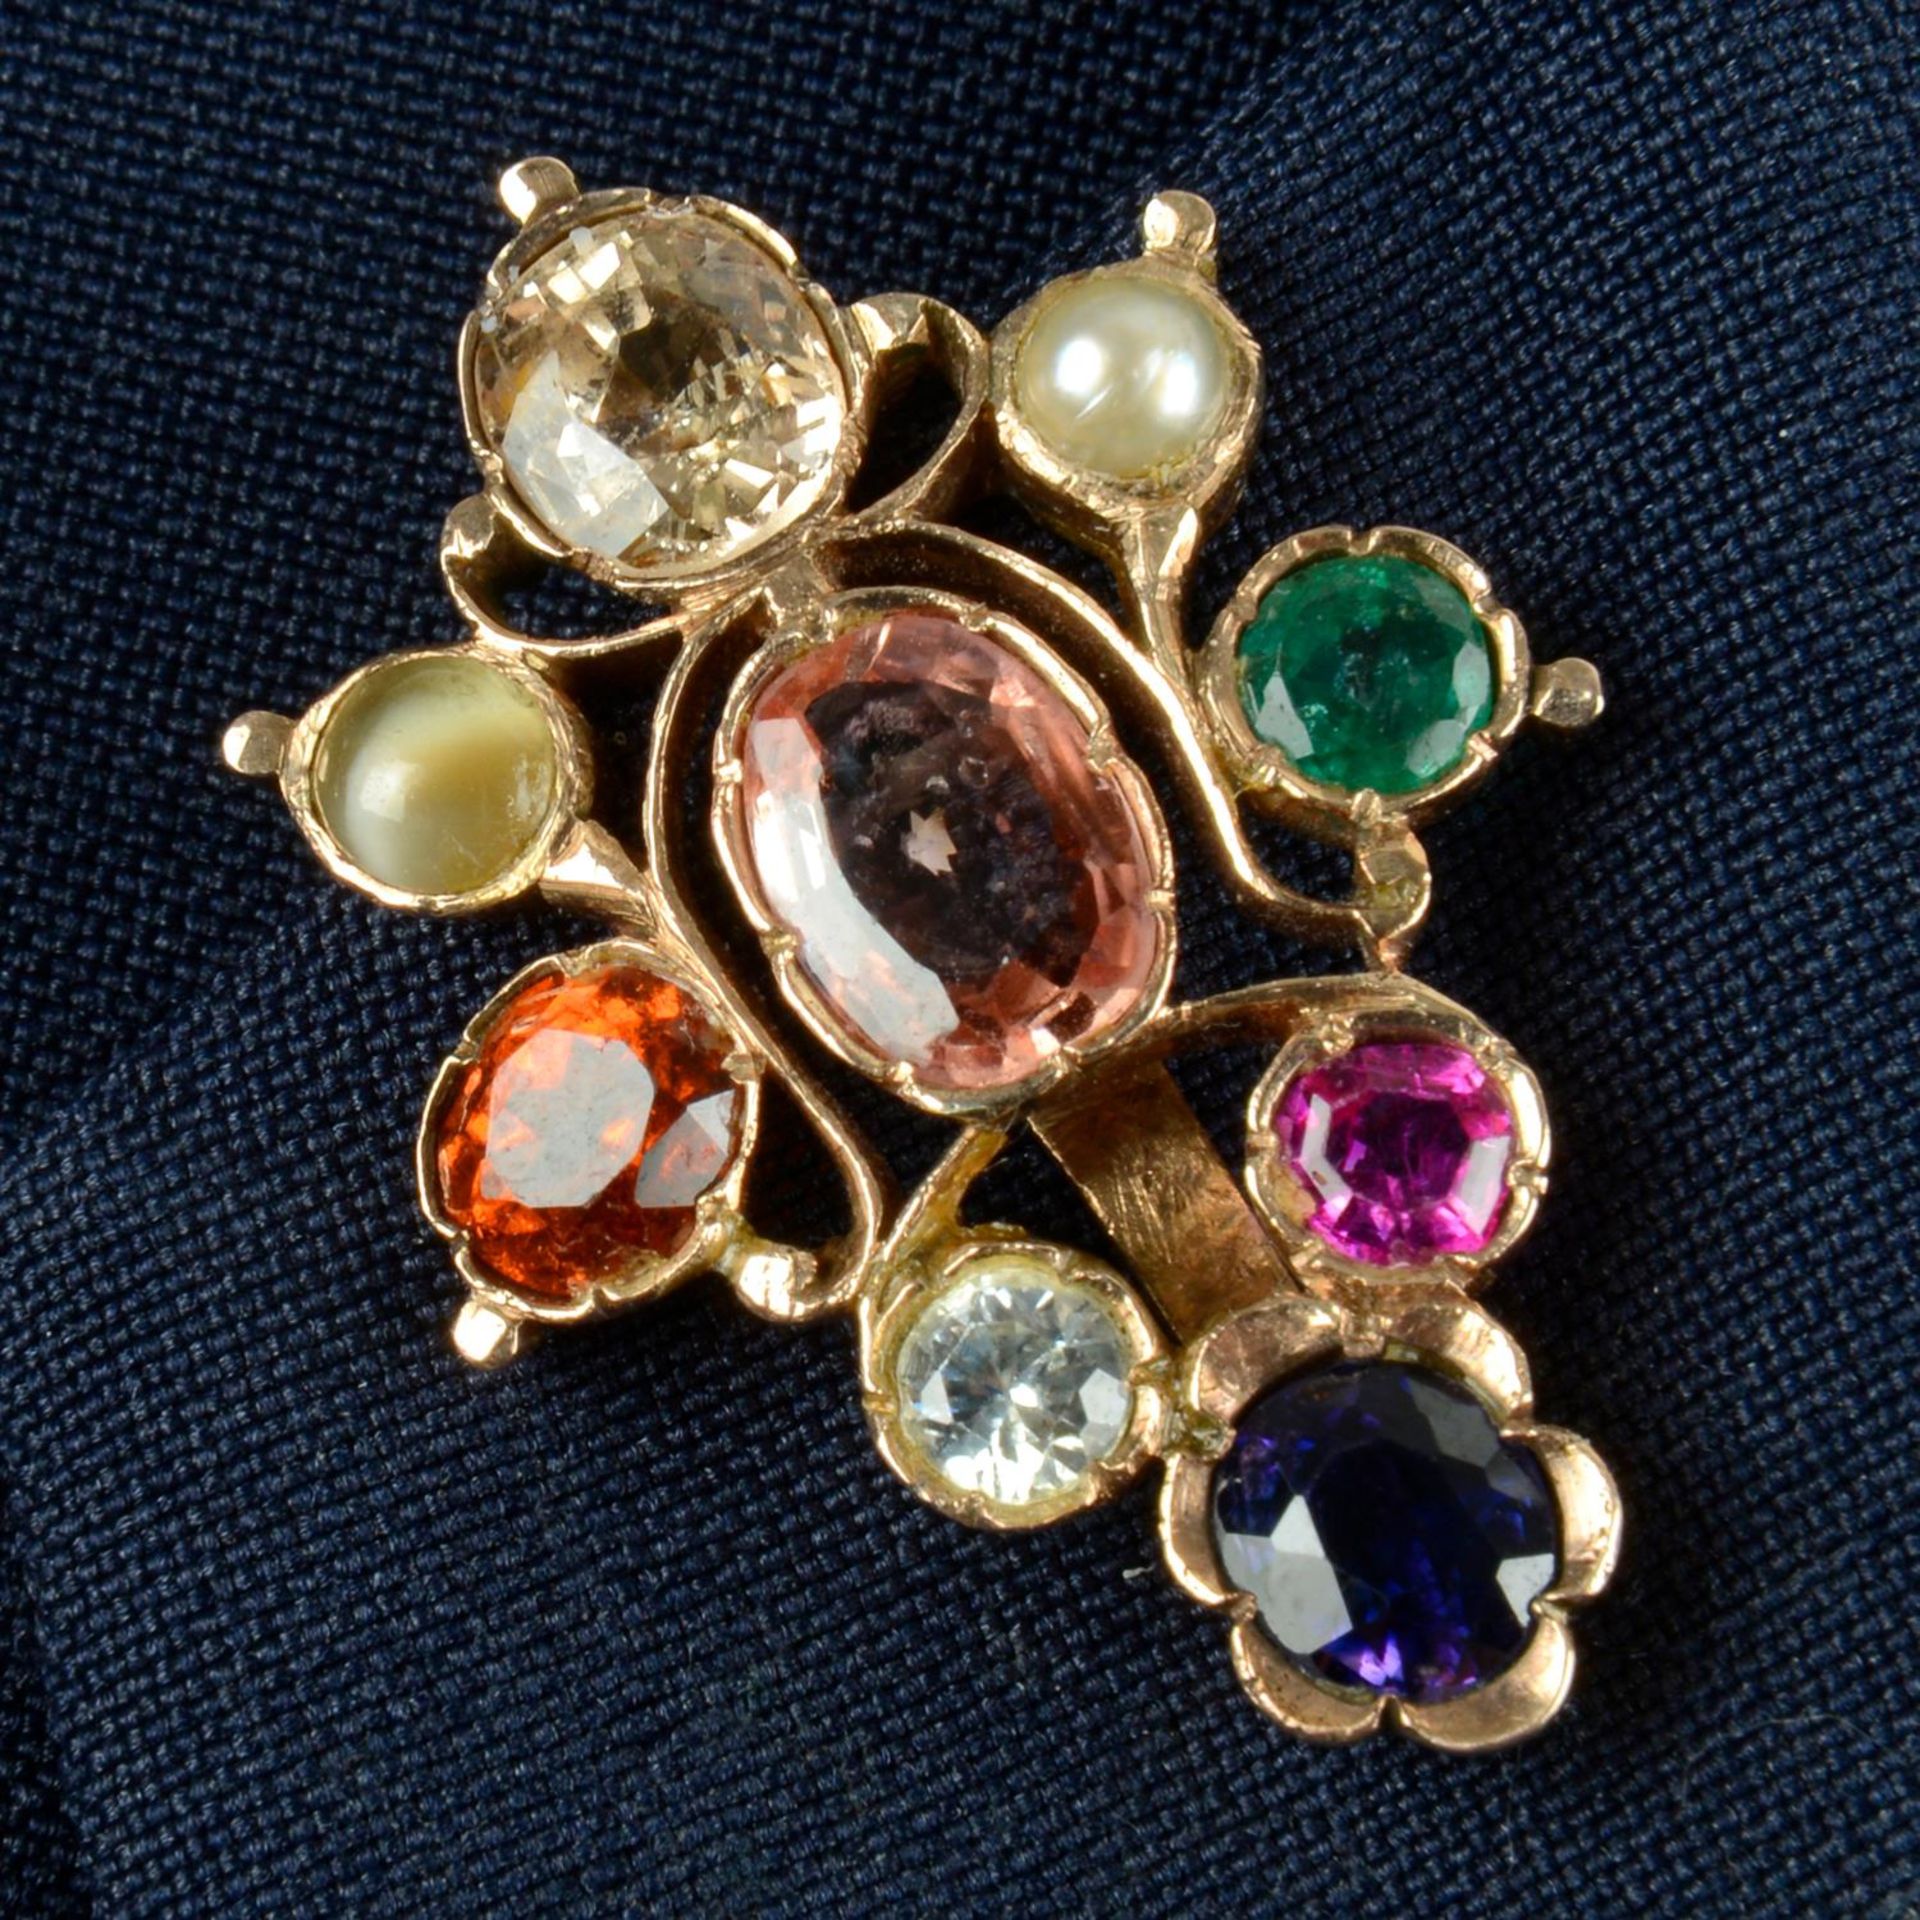 An early to mid 20th century gold Navaratna type clip, the Sri Lankan peach sapphire with yellow,